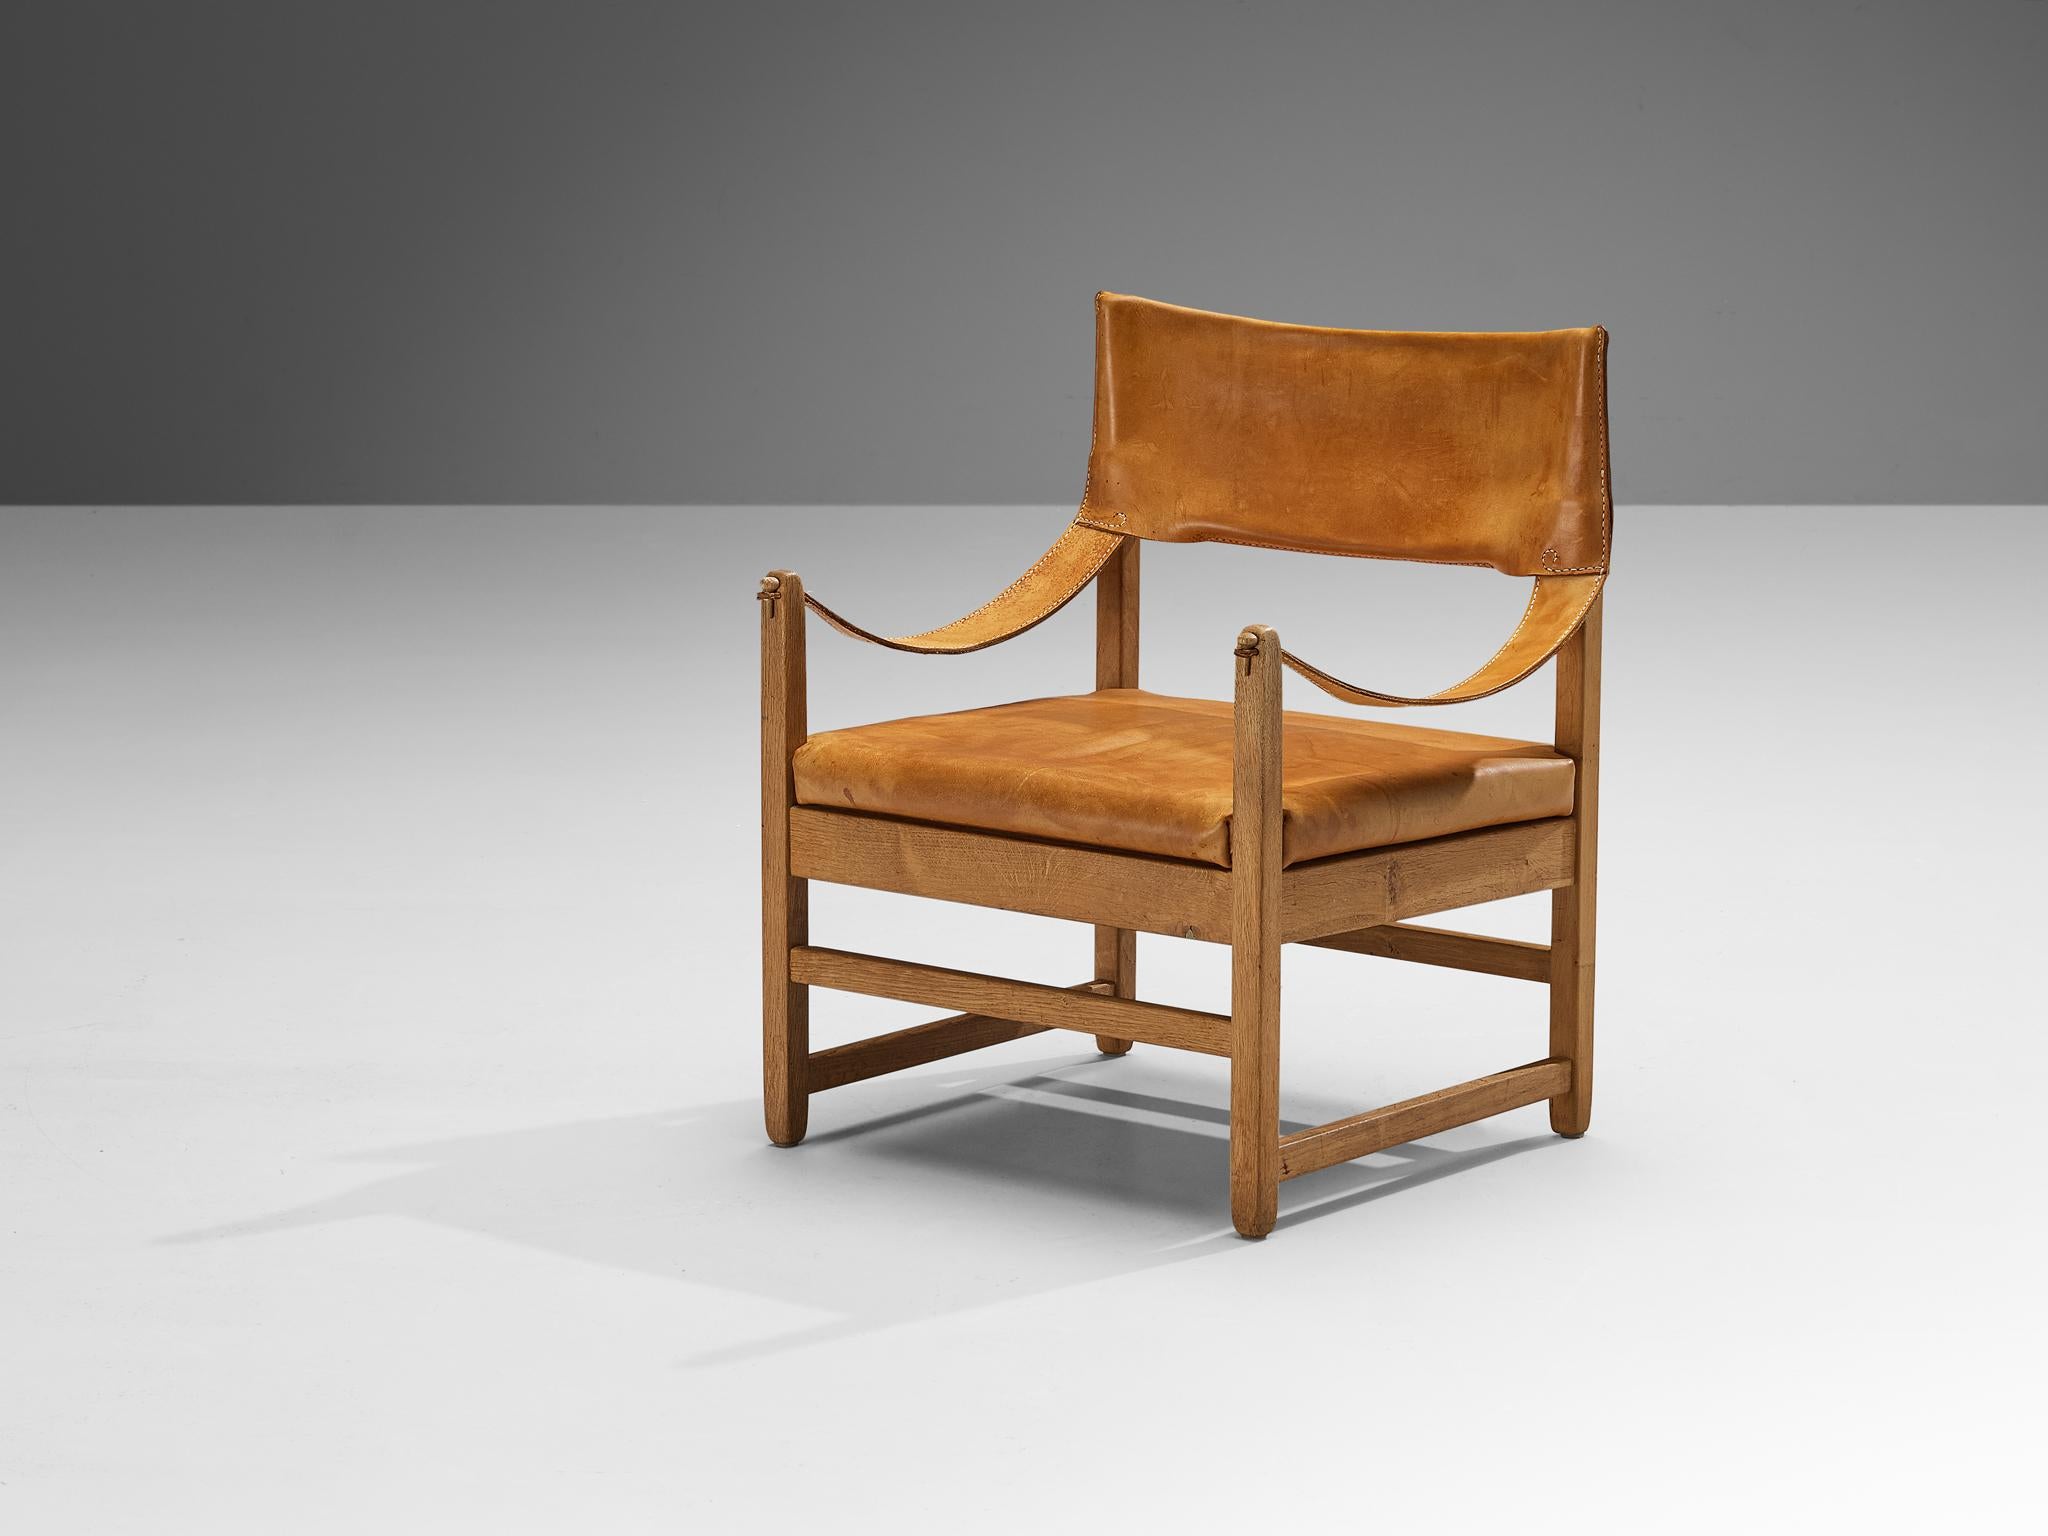 Armchair, leather, oak, Denmark, 1960s

Well-constructed armchair from Denmark with a solid appearance. Sculpted wooden elements constitute its framework. As characteristic for safari chairs, the armrests are made of thick straps that are